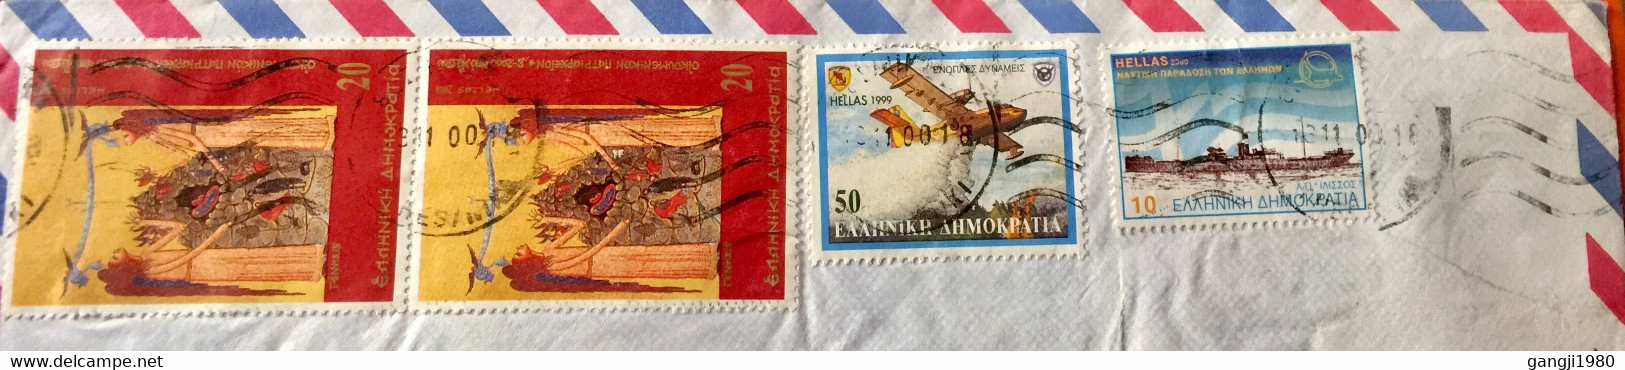 GREECE 2000, USED AIRMAIL COVER TO INDIA,4 STAMPS ,SHIP ,AEROPLANE,ART, PAINTING,WOMEN,GIRLS,THESSALONIKI,CANCELLATION - Storia Postale